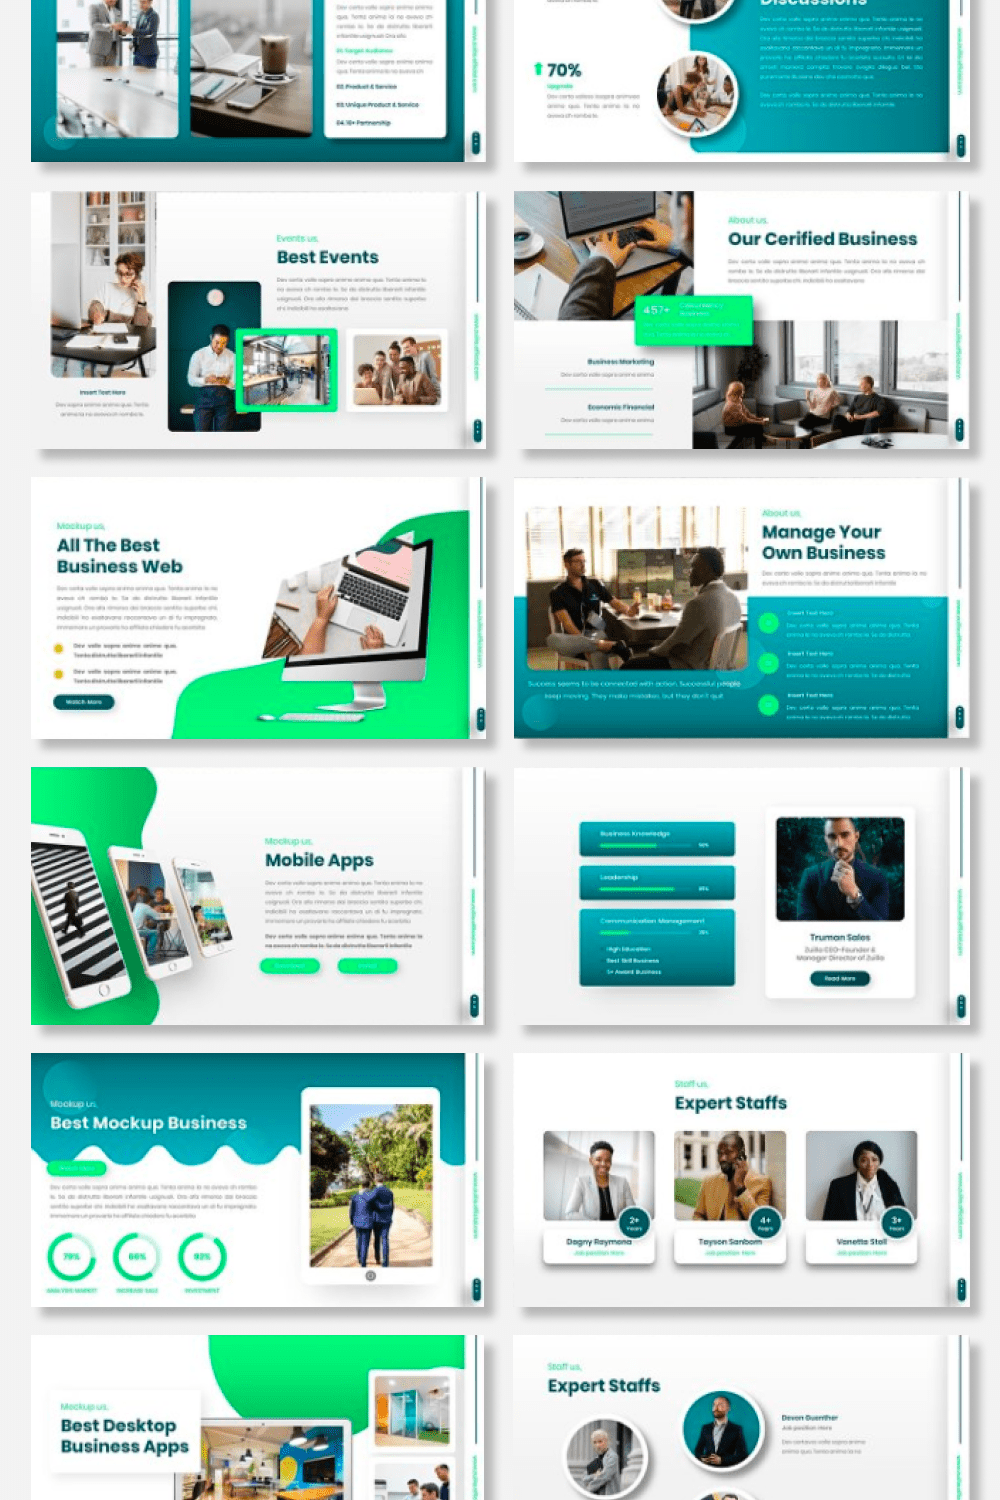 Template includes good colors mix and vivid elements.